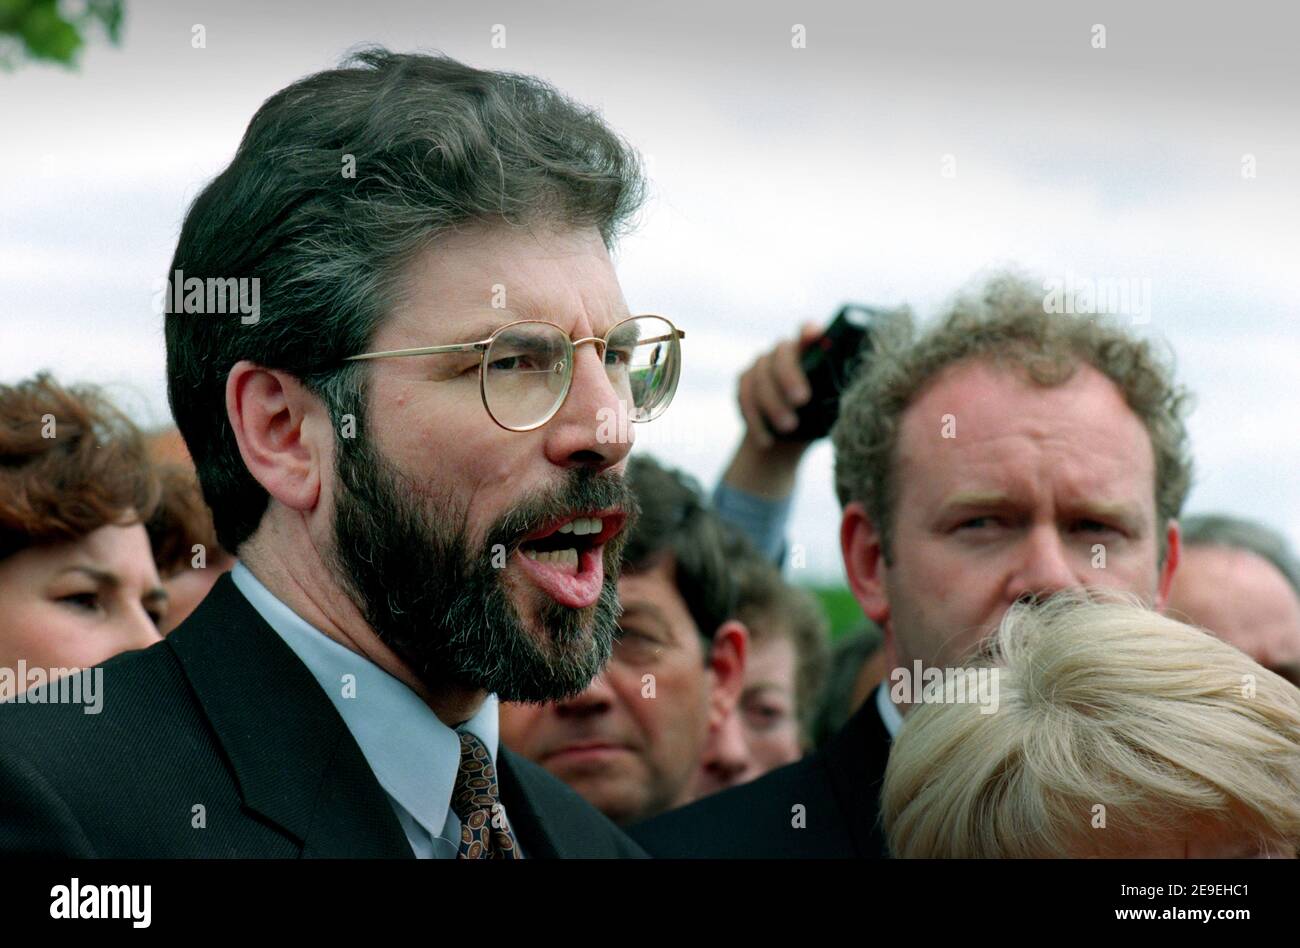 Northern Ireland Peace Talks in Belfast June 1996 Showing Sinn Fein Leaders Gerry Adams and Martin McGuinness who were all excluded from the Stormont peace negotiations at the time. Stock Photo